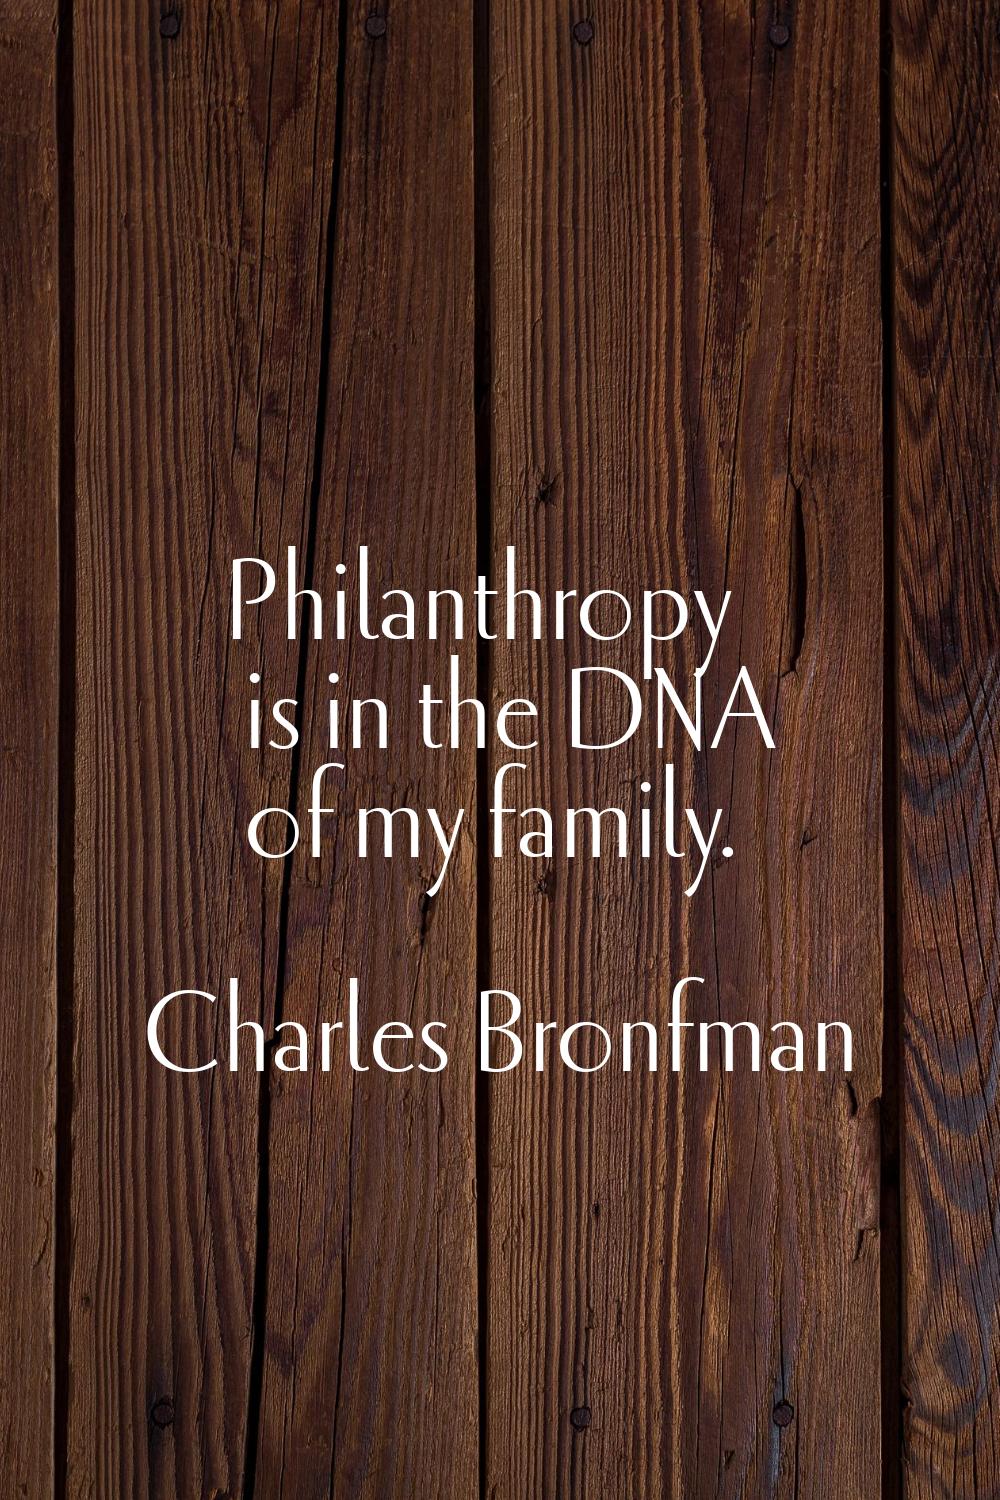 Philanthropy is in the DNA of my family.